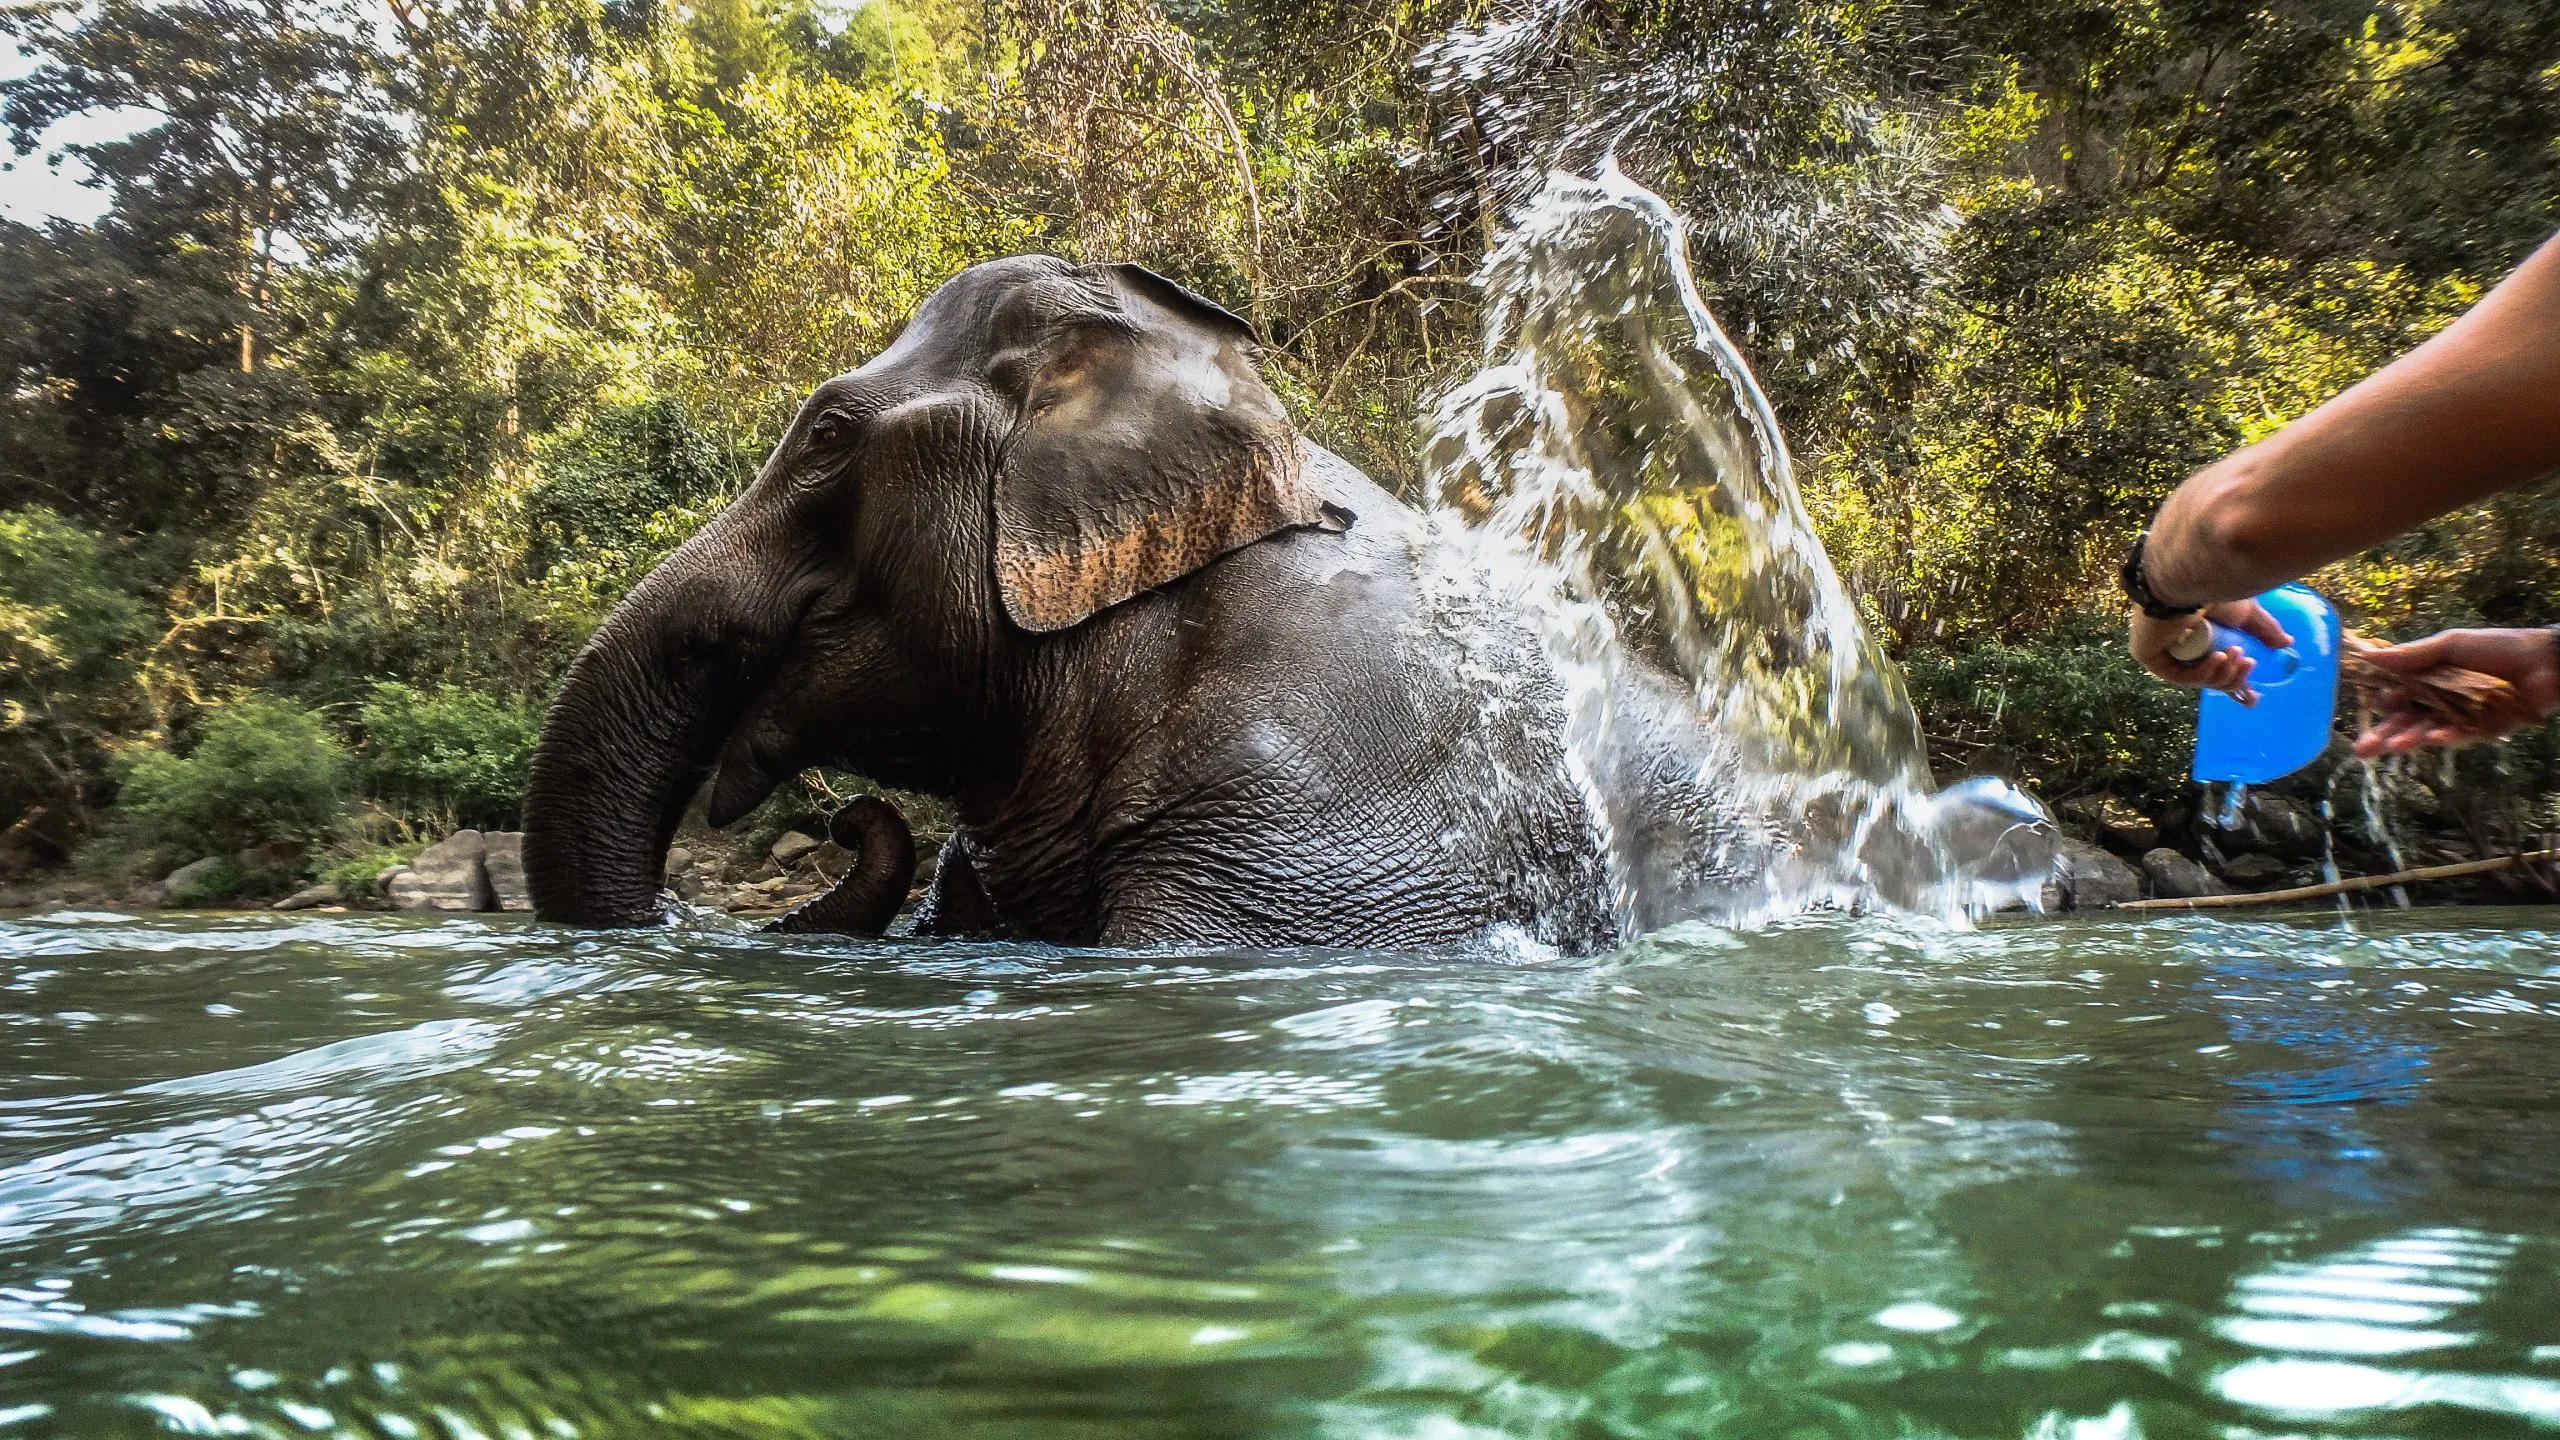 wild elephant playing and bathing in the water or a river